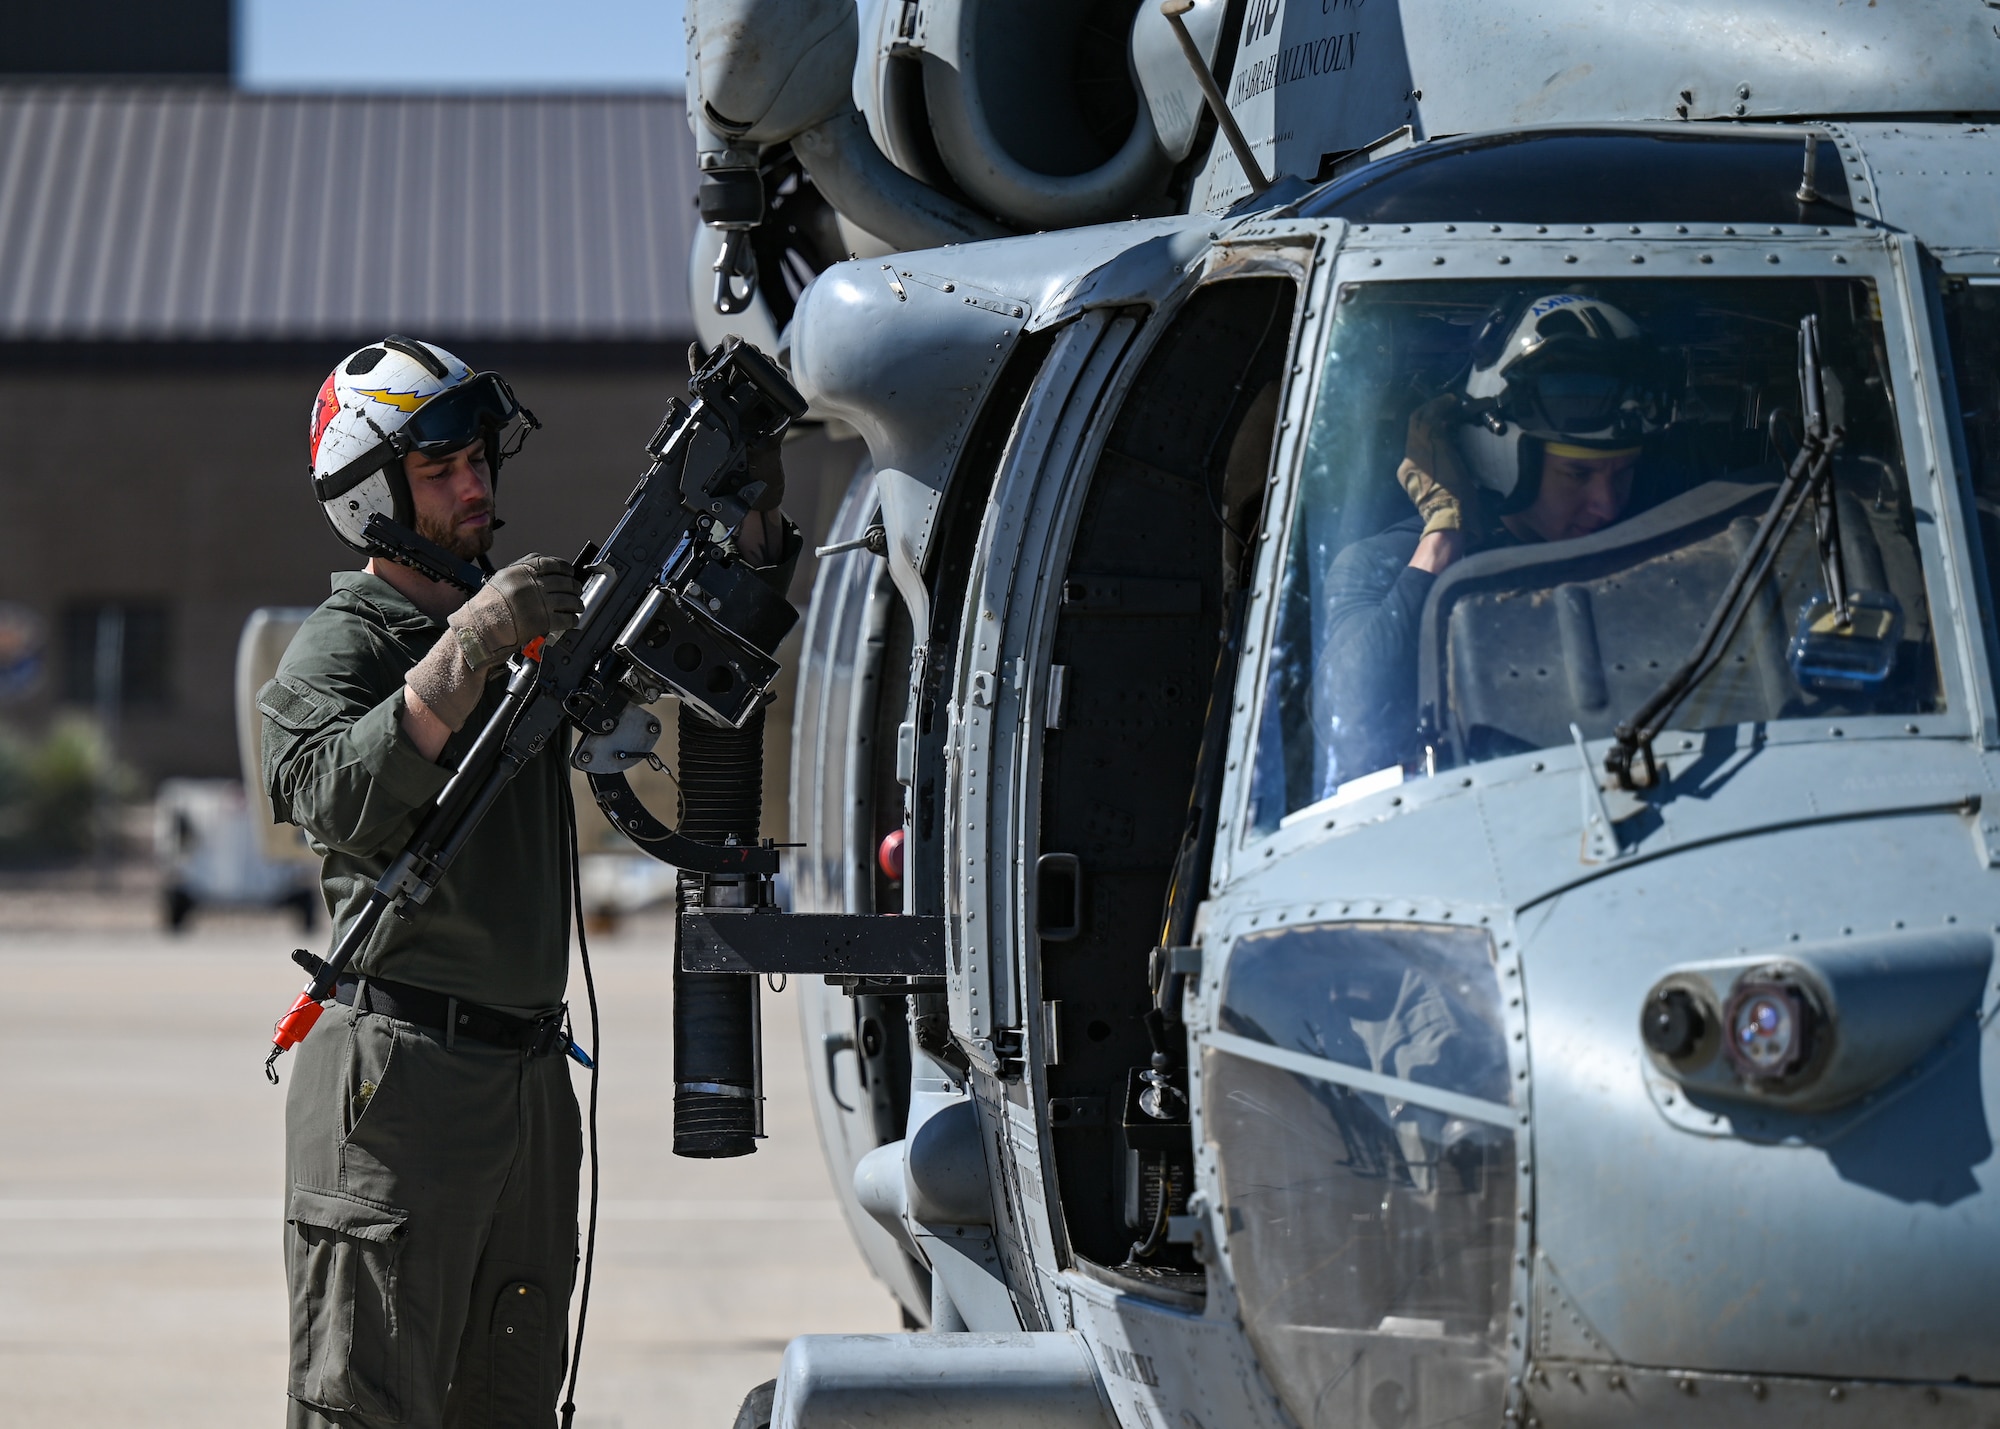 A man in a military uniform inspects a weapon attached to a helicopter.